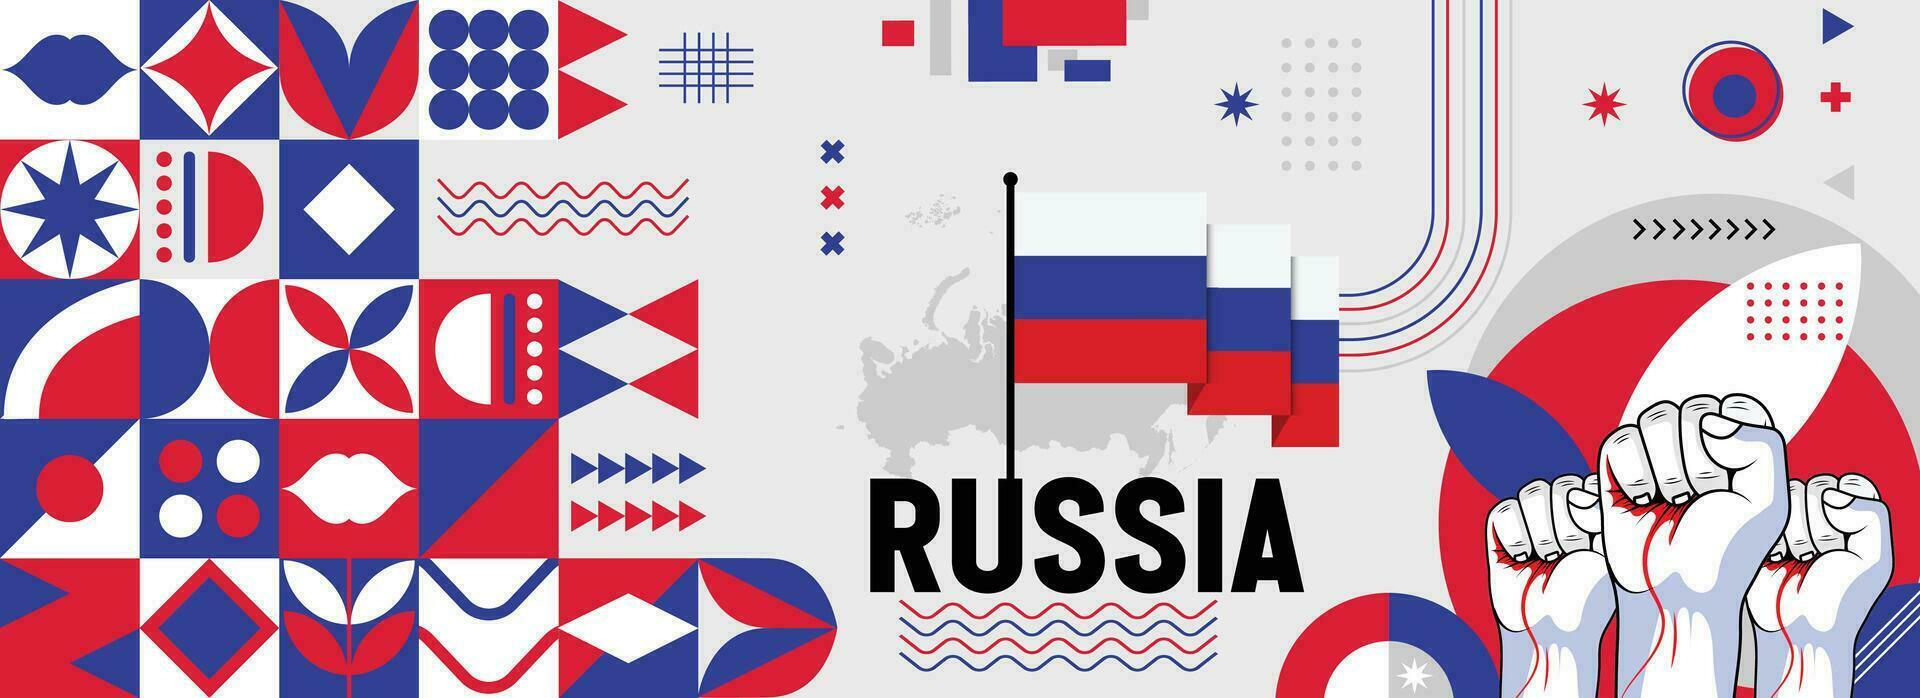 Russia national or independence day banner for country celebration. Flag and map of Russian with raised fists. Modern retro design with typorgaphy abstract geometric icons. Vector illustration